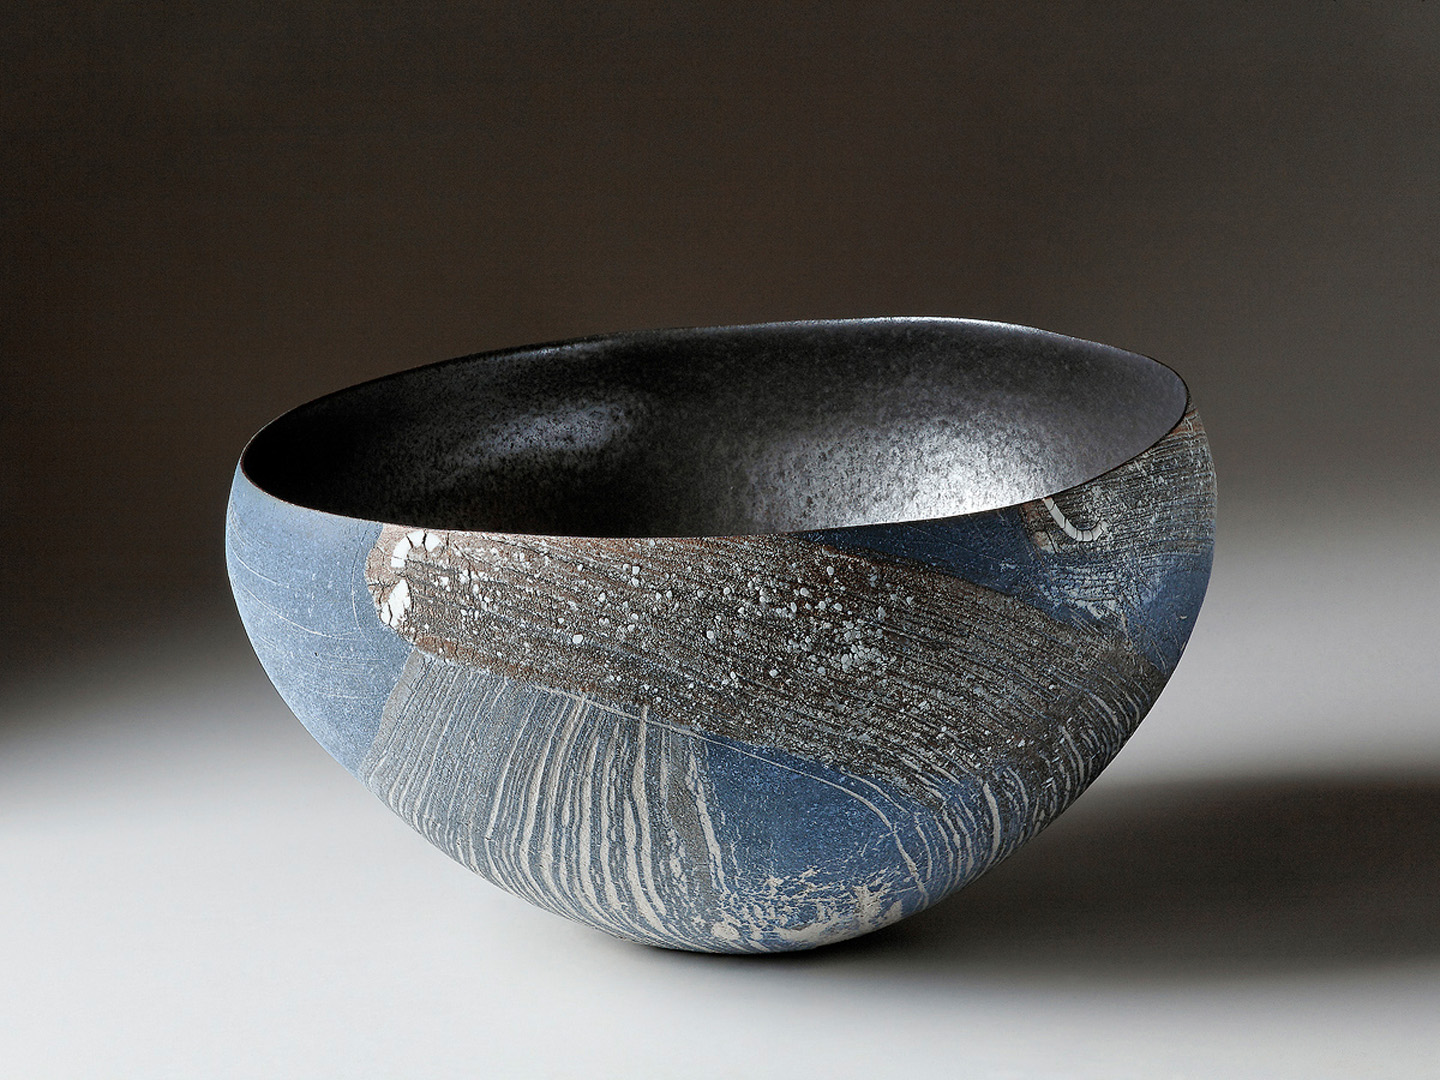 "Strukturschale", Bowl with structure, 2007; stoneware, slips, oxide, glaze, reduced fired at cone 9; height 20 cm, diameter 30 cm